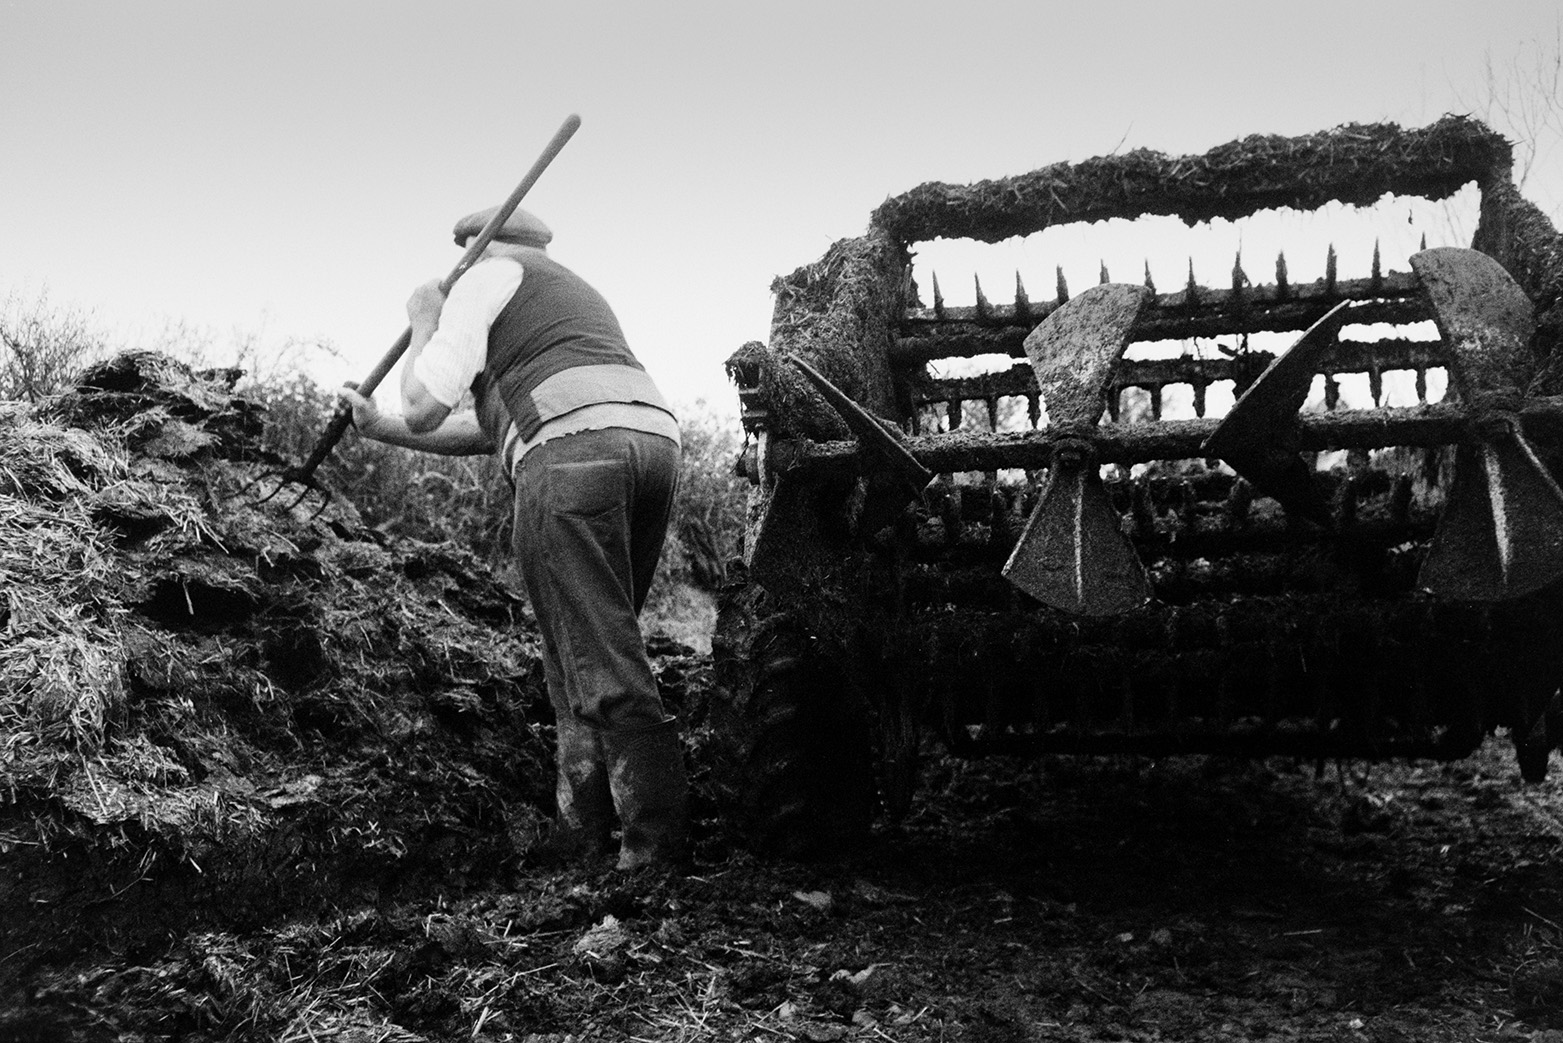 Tom Hooper shovelling manure into a muck spreader from a muck heap or dung heap in a field at Mill Road Farm, Beaford. He is using a fork. The farm was also known as Jeffrys.